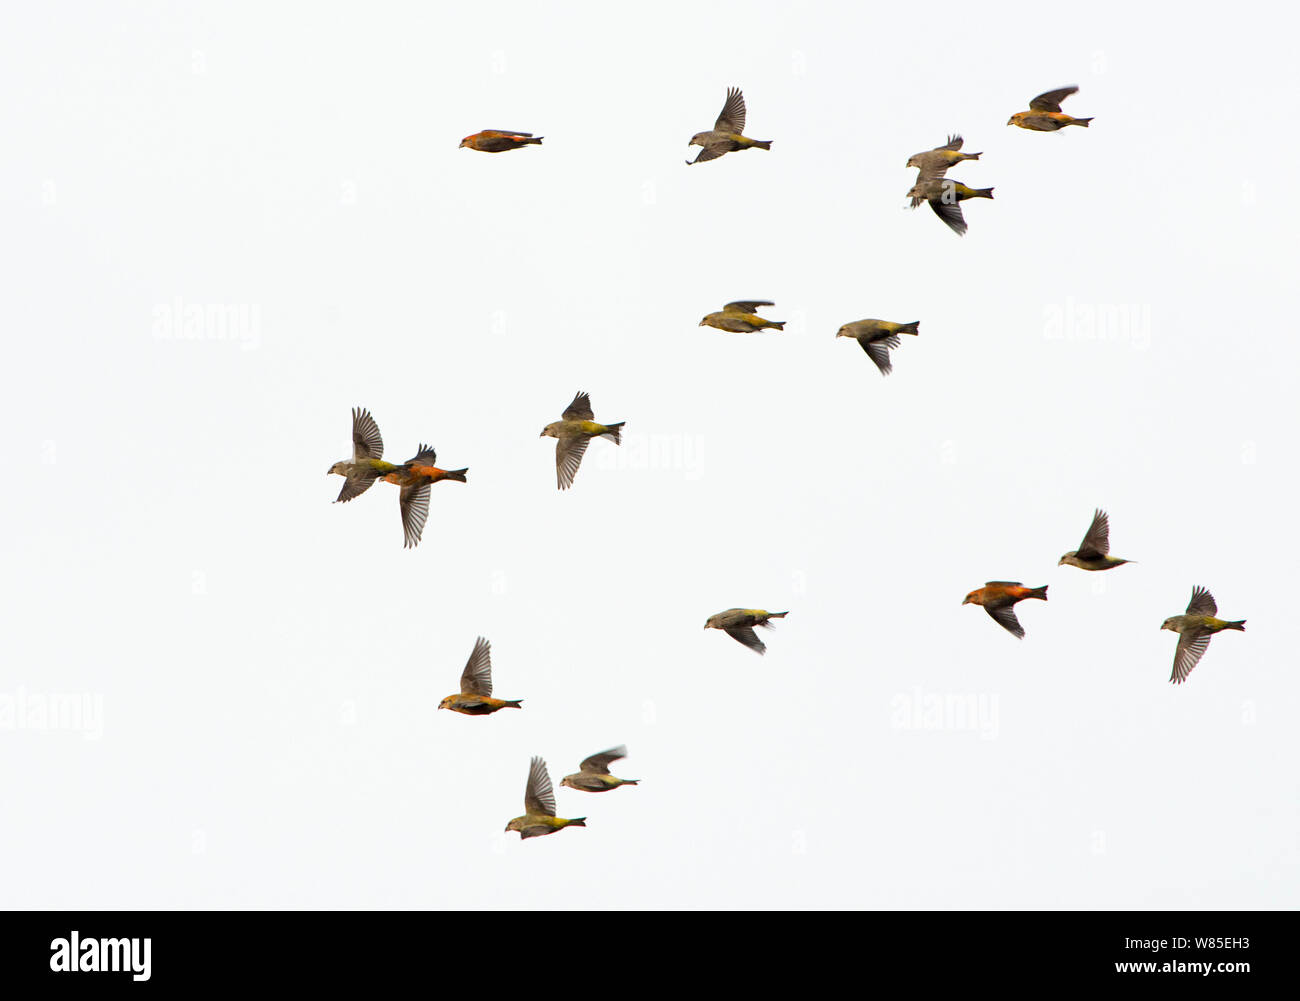 Common Crossbills (Loxia curvirostra) in flight, Holt, Norfolk, England, UK. March. Stock Photo